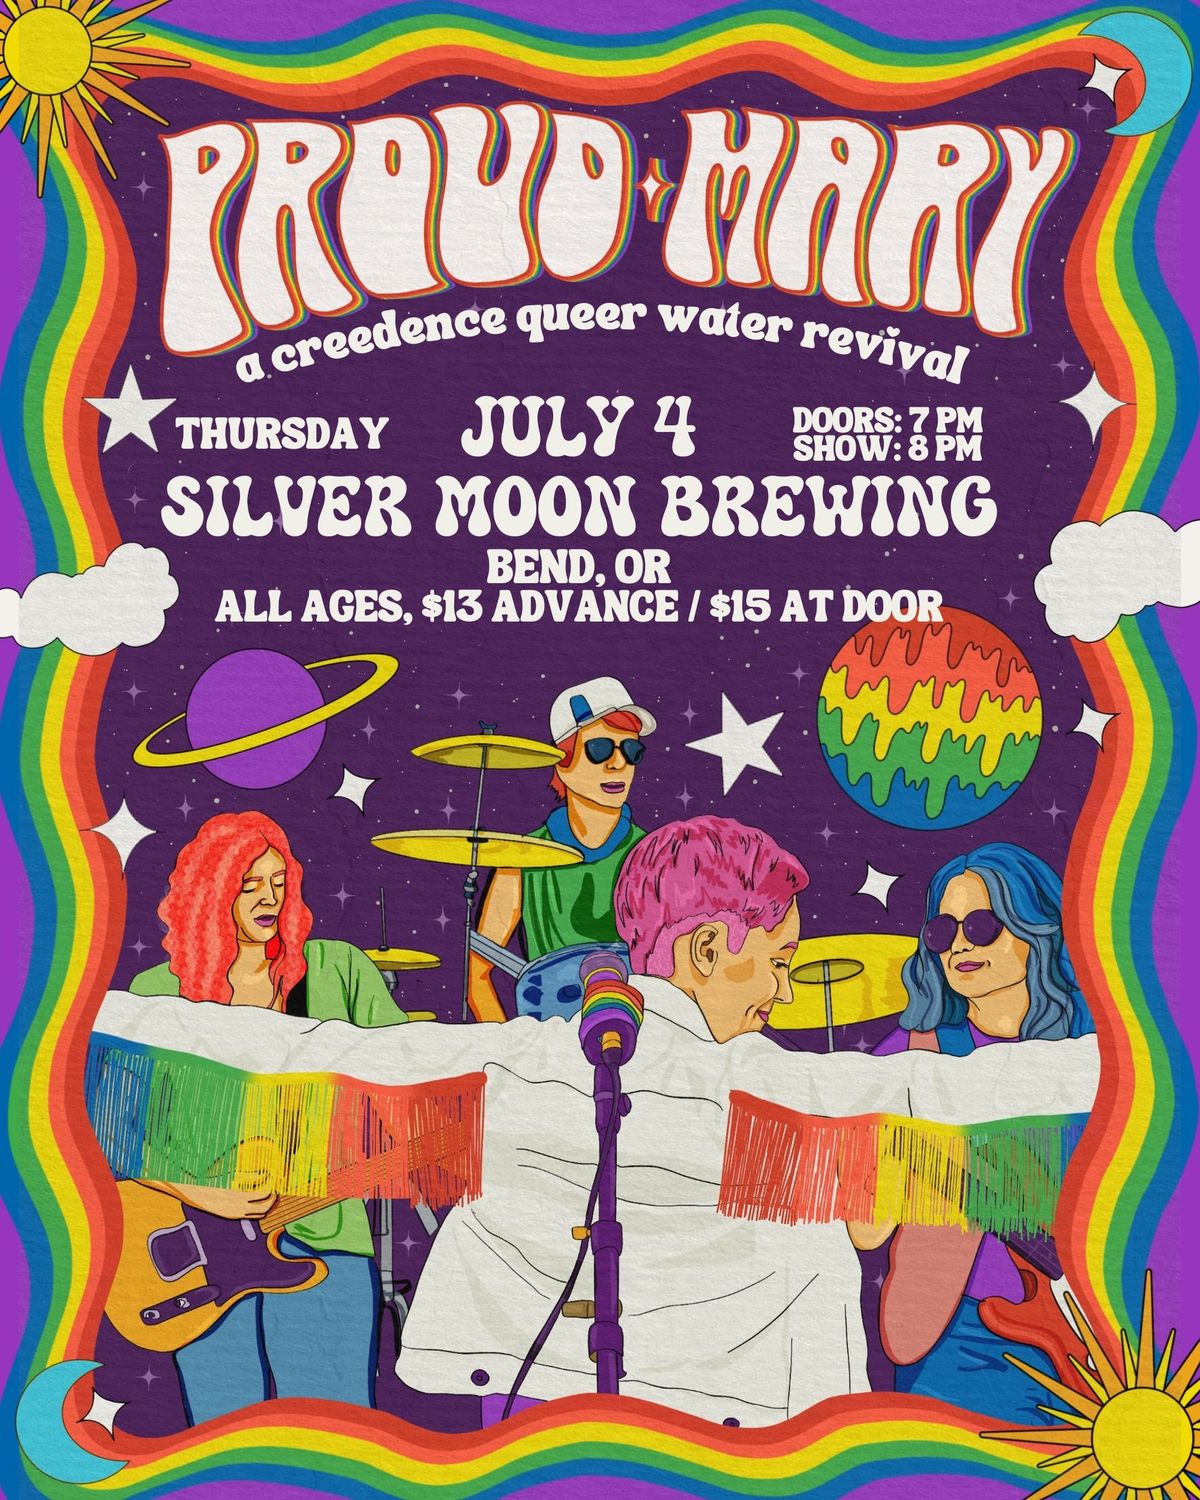 Proud Mary 4th of July Bash at Silver Moon Brewing (CCR tribute band)